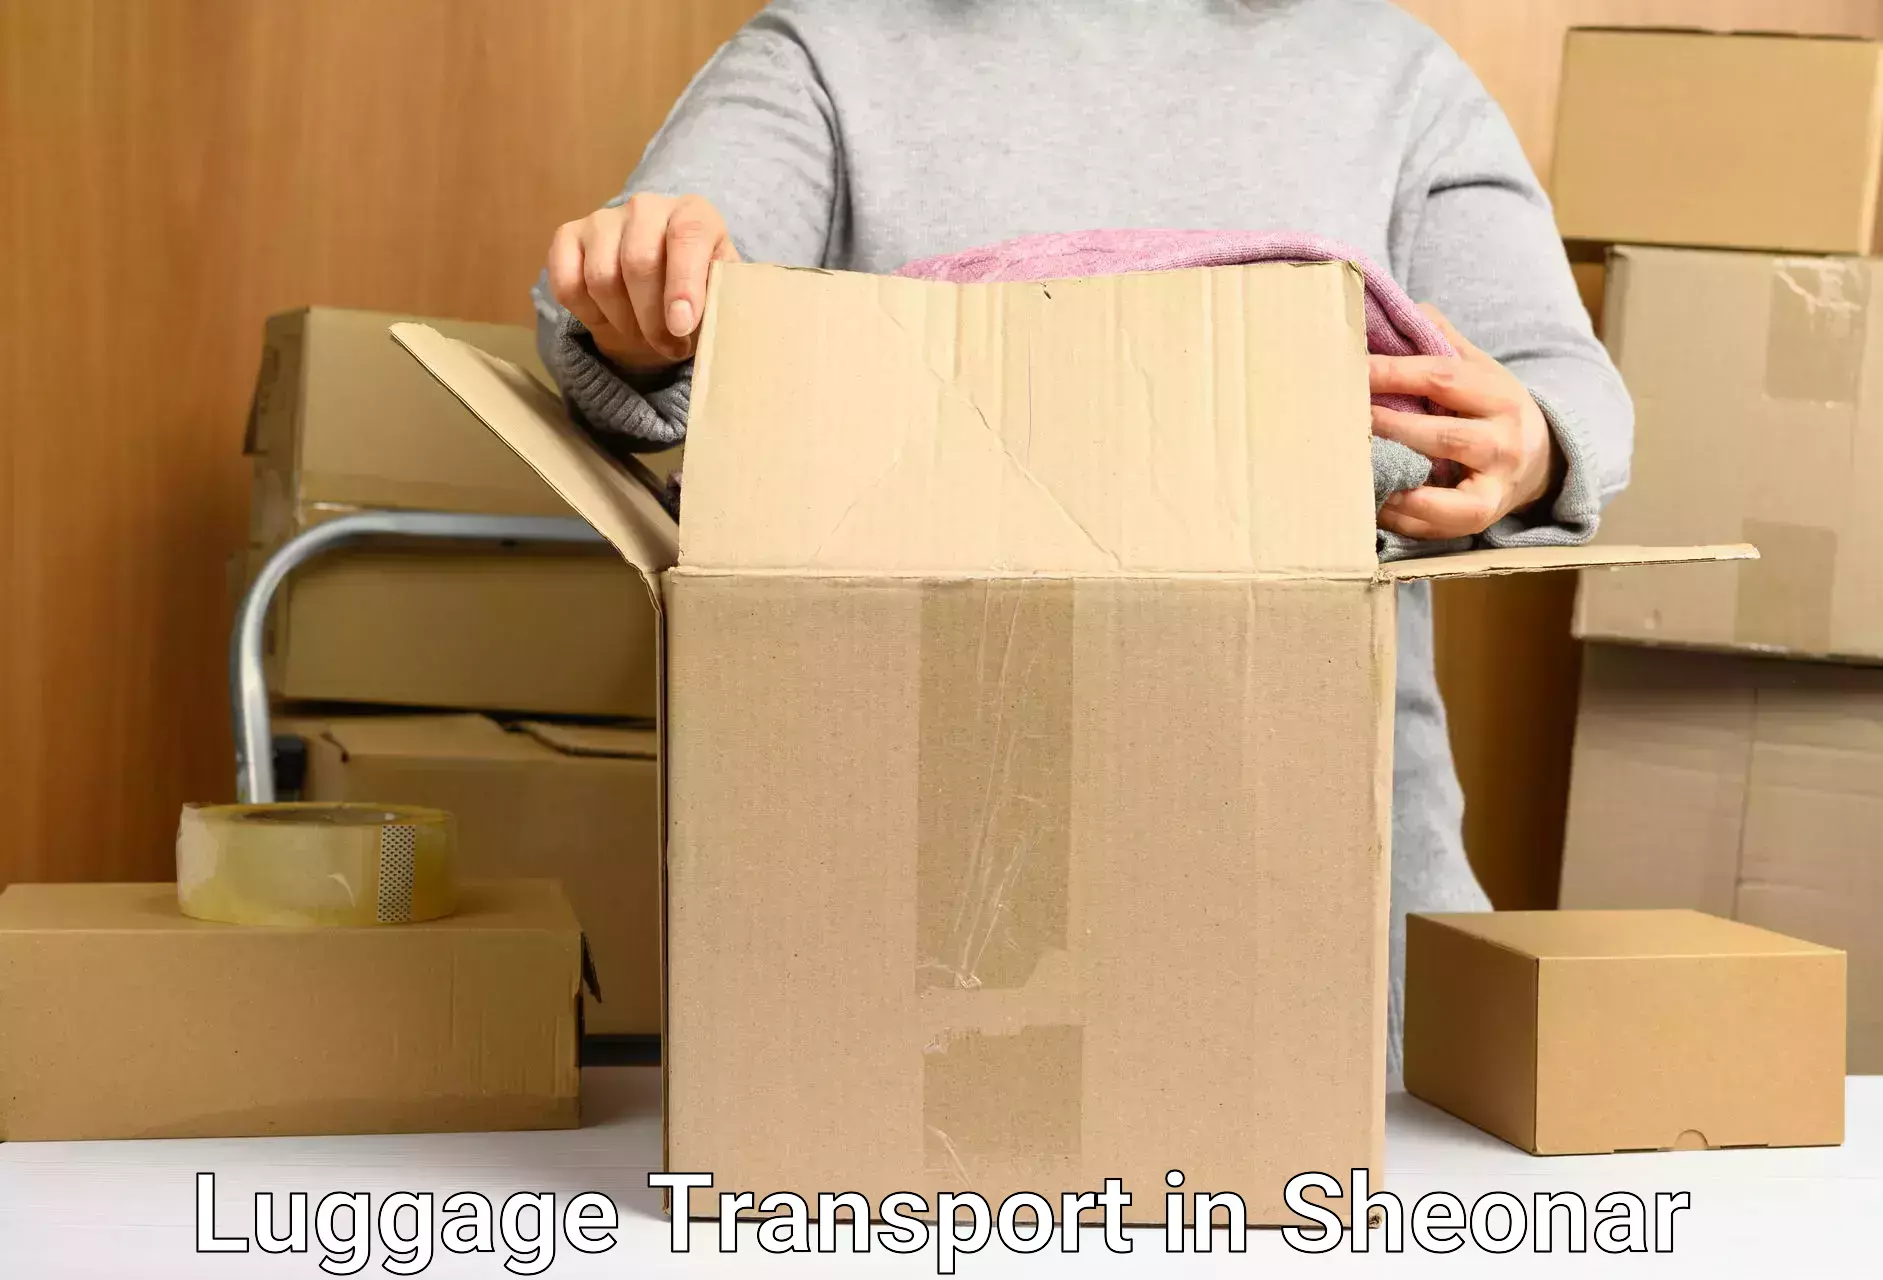 Baggage delivery scheduling in Sheonar